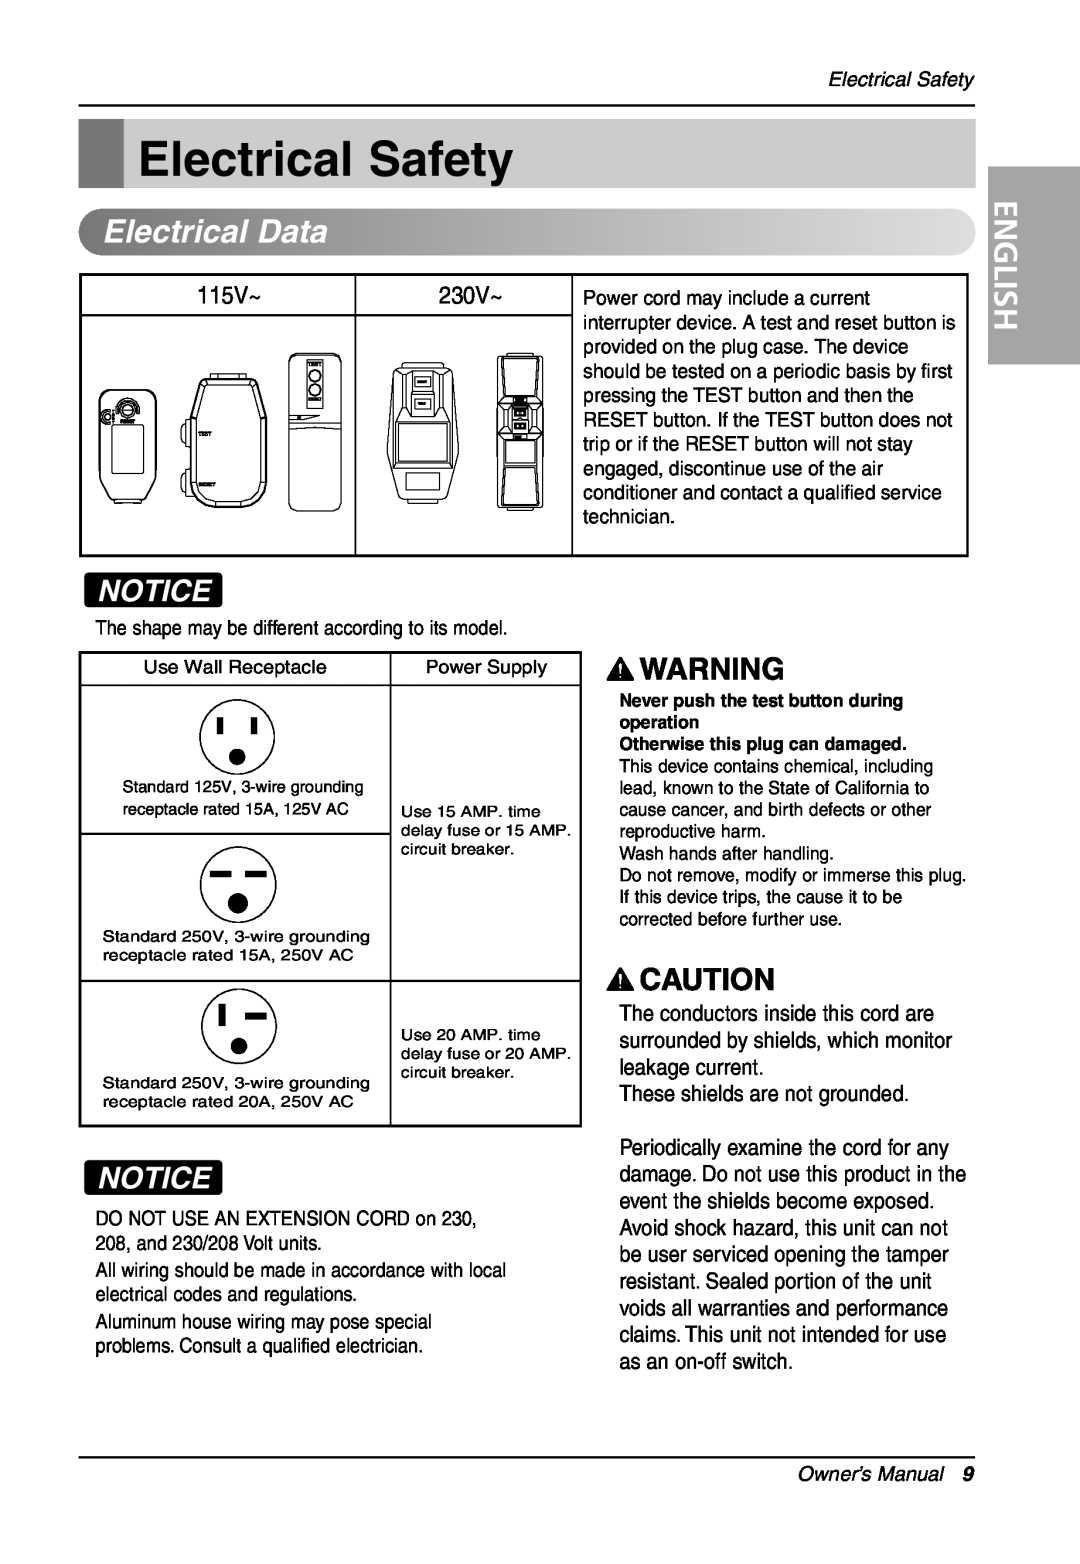 LG Electronics LW701 HR owner manual Electrical Safety, ElectricalData, English, Owner’s Manual 